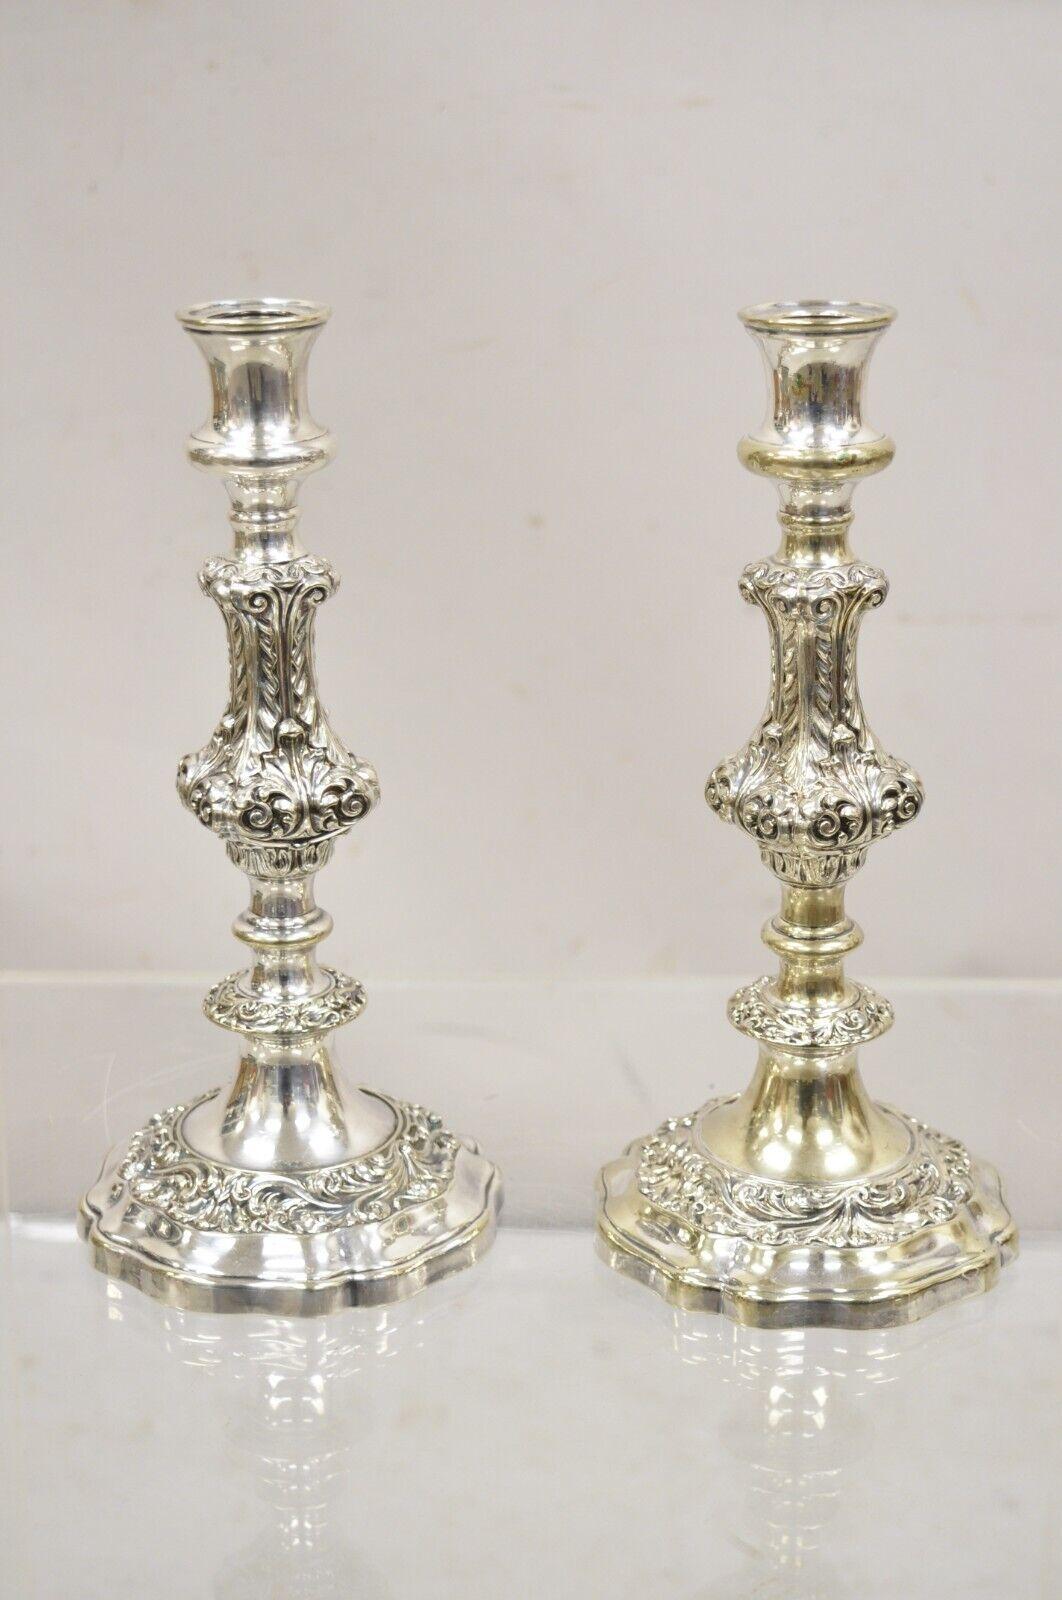 Vintage Gorham Baroque Repousse Silver Plated Single Candle Candlesticks a Pair.